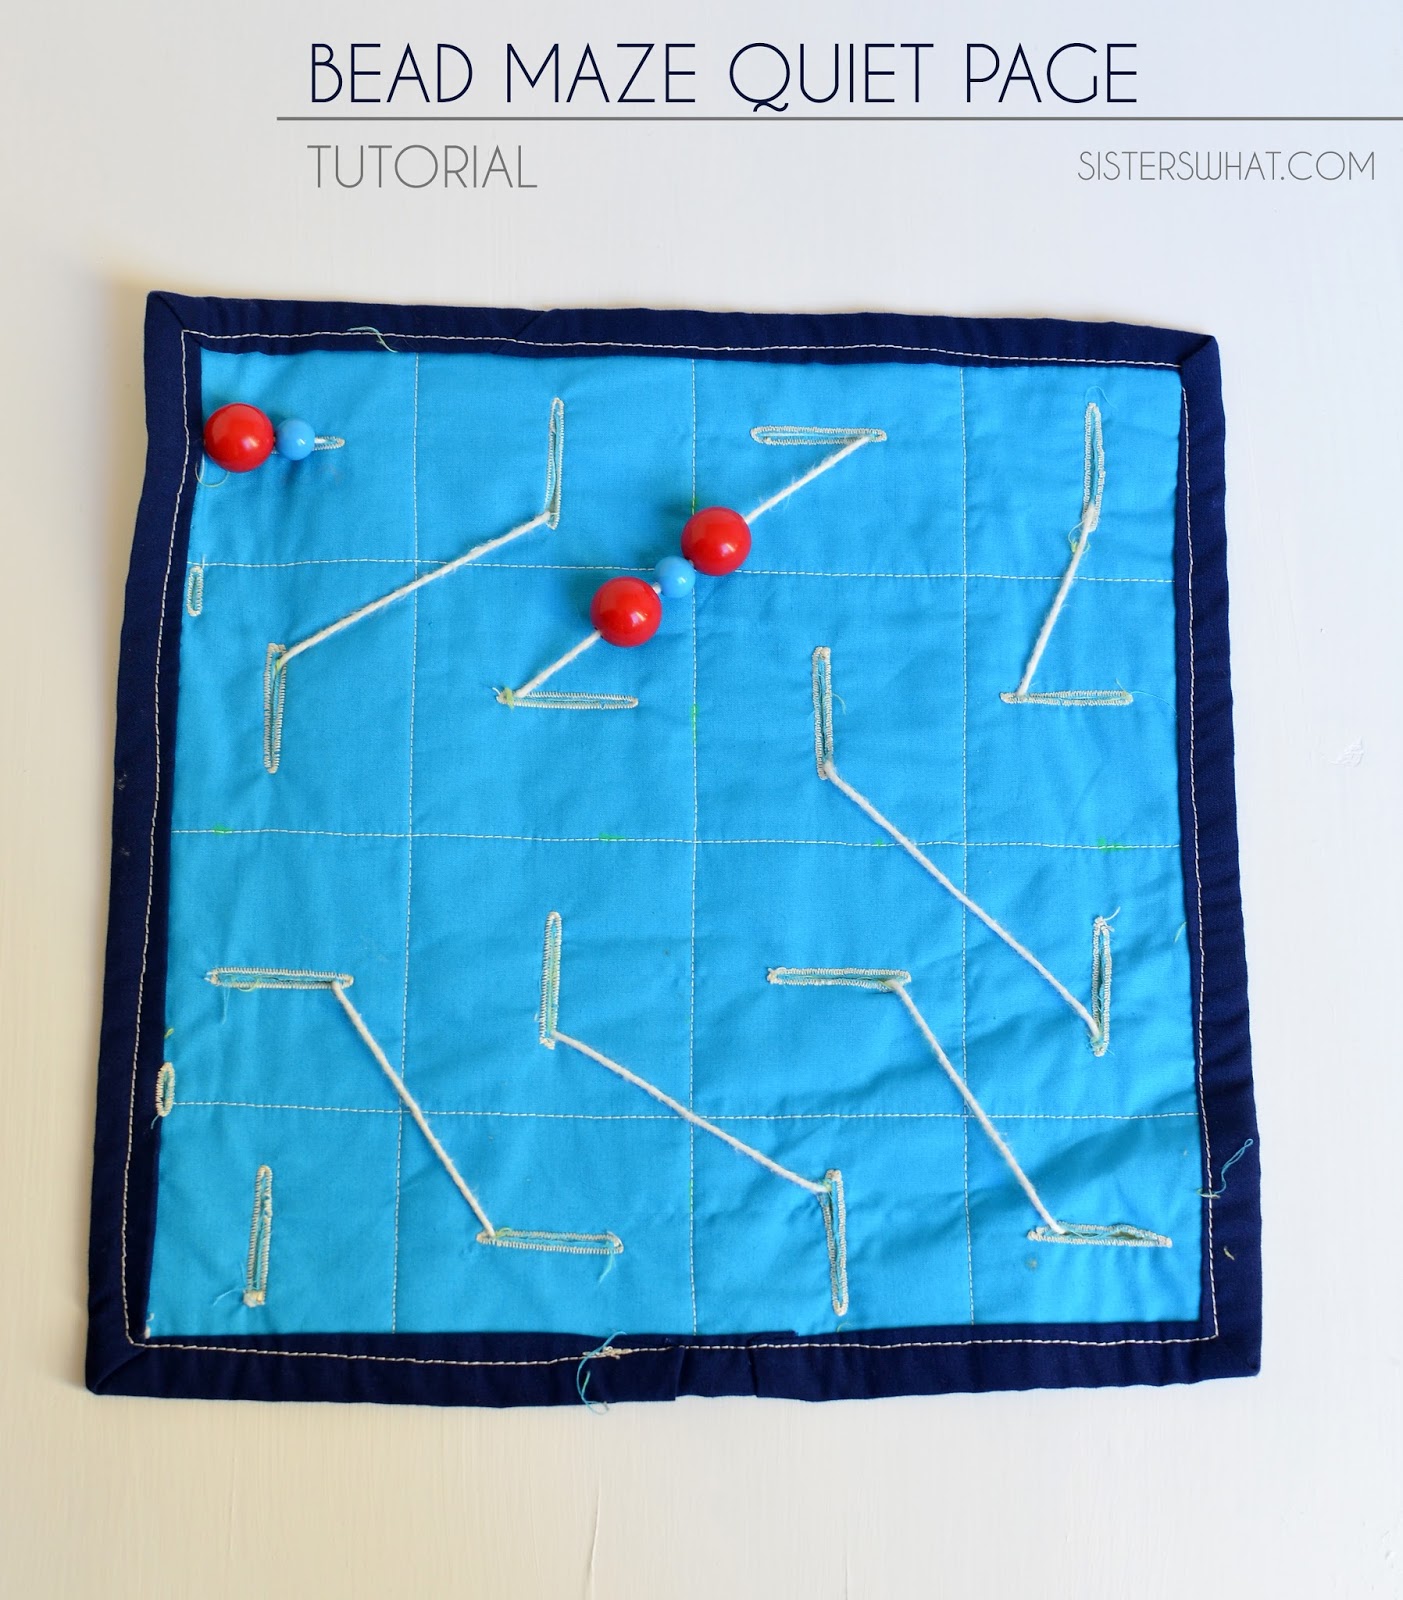 how to make a bead maze quiet page 